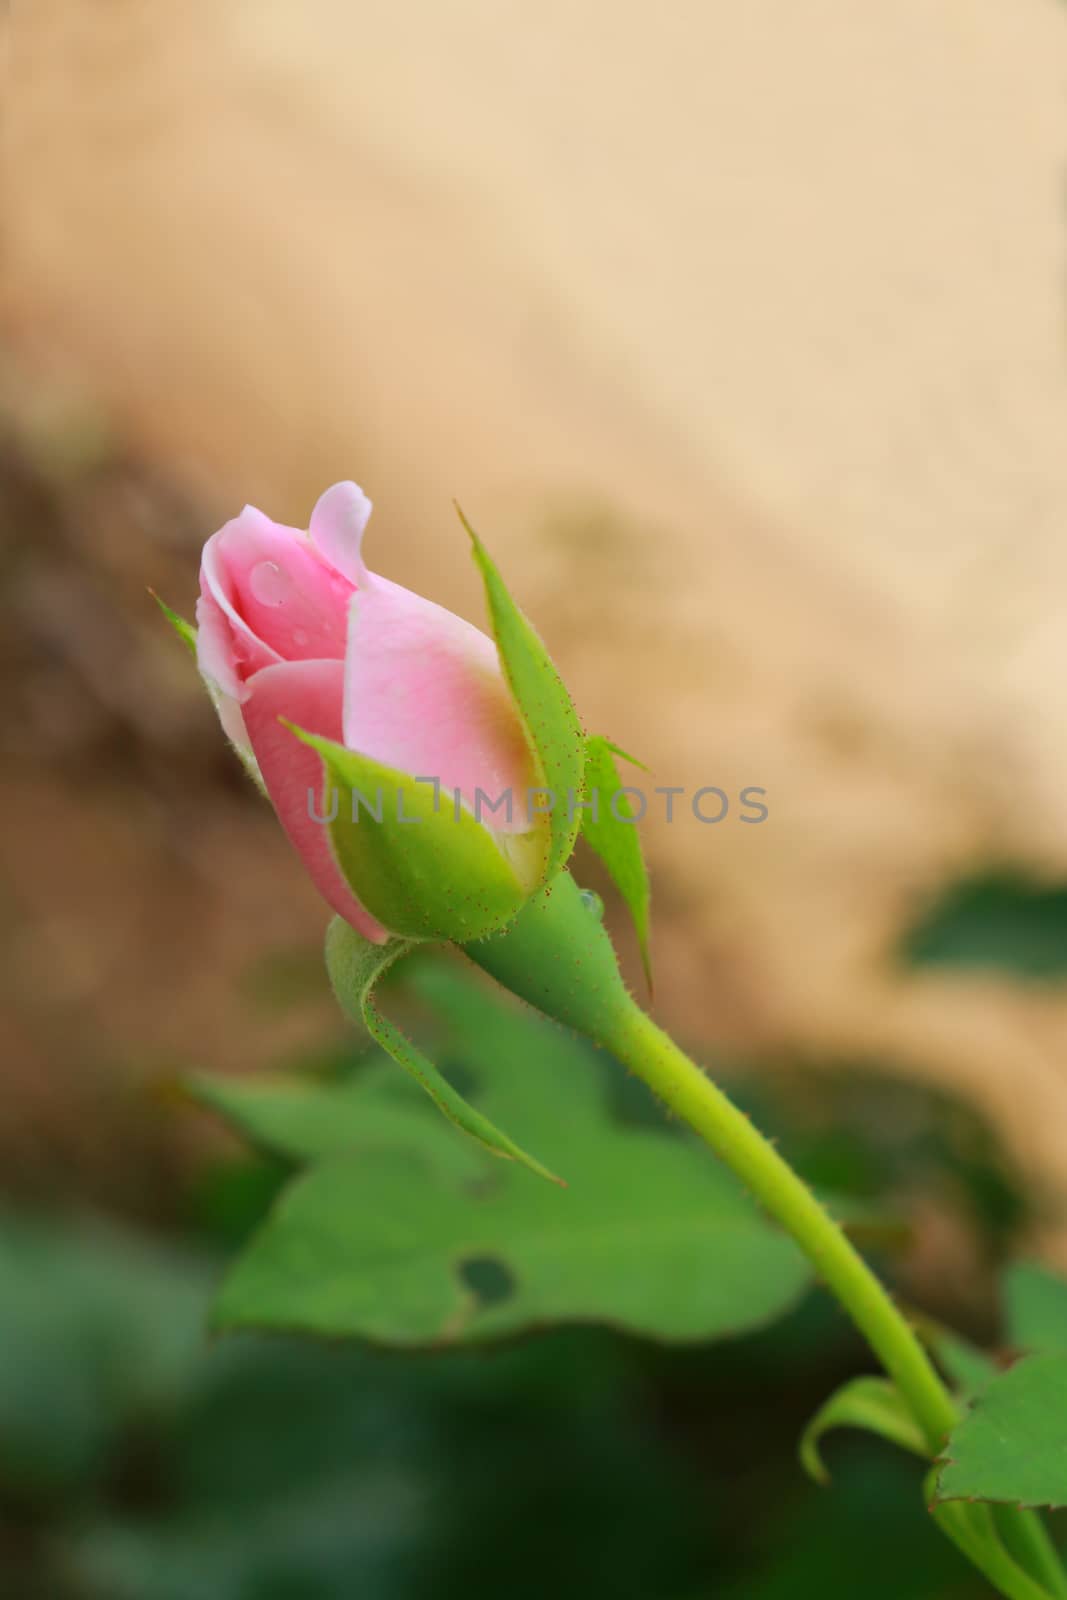 The furl pink rose which have drops on the petal.